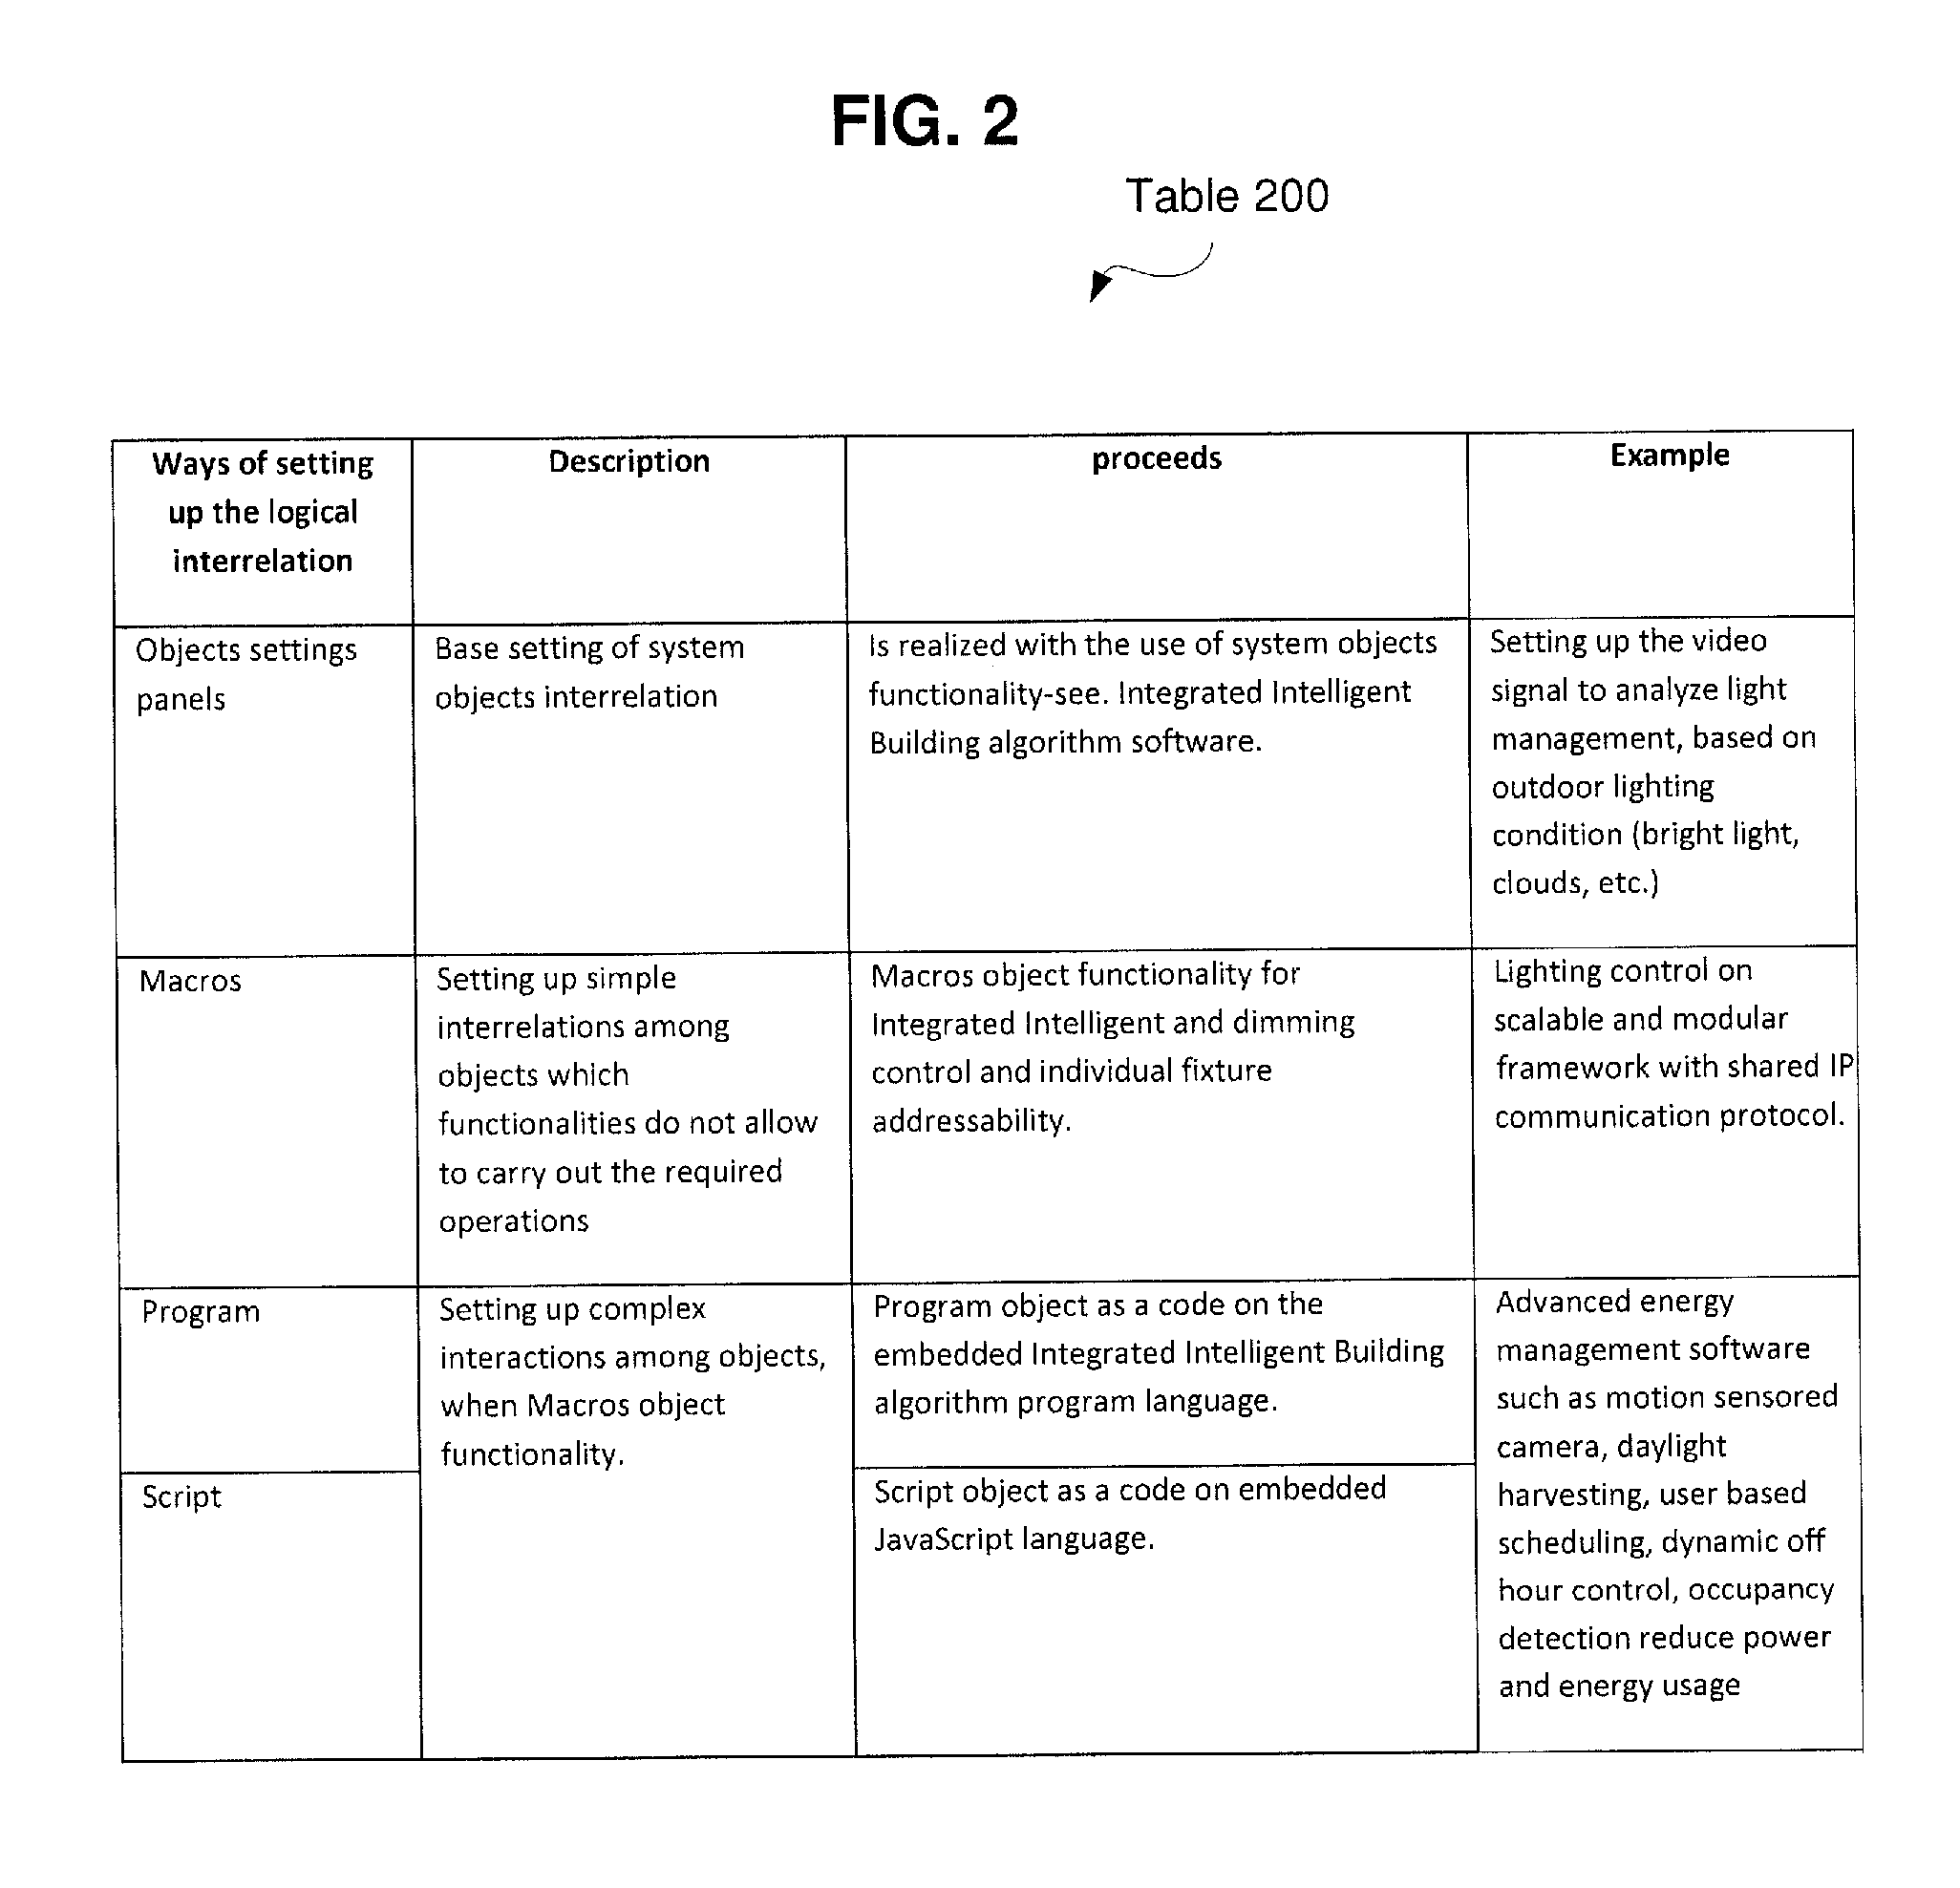 Method and System for an Integrated Intelligent Building